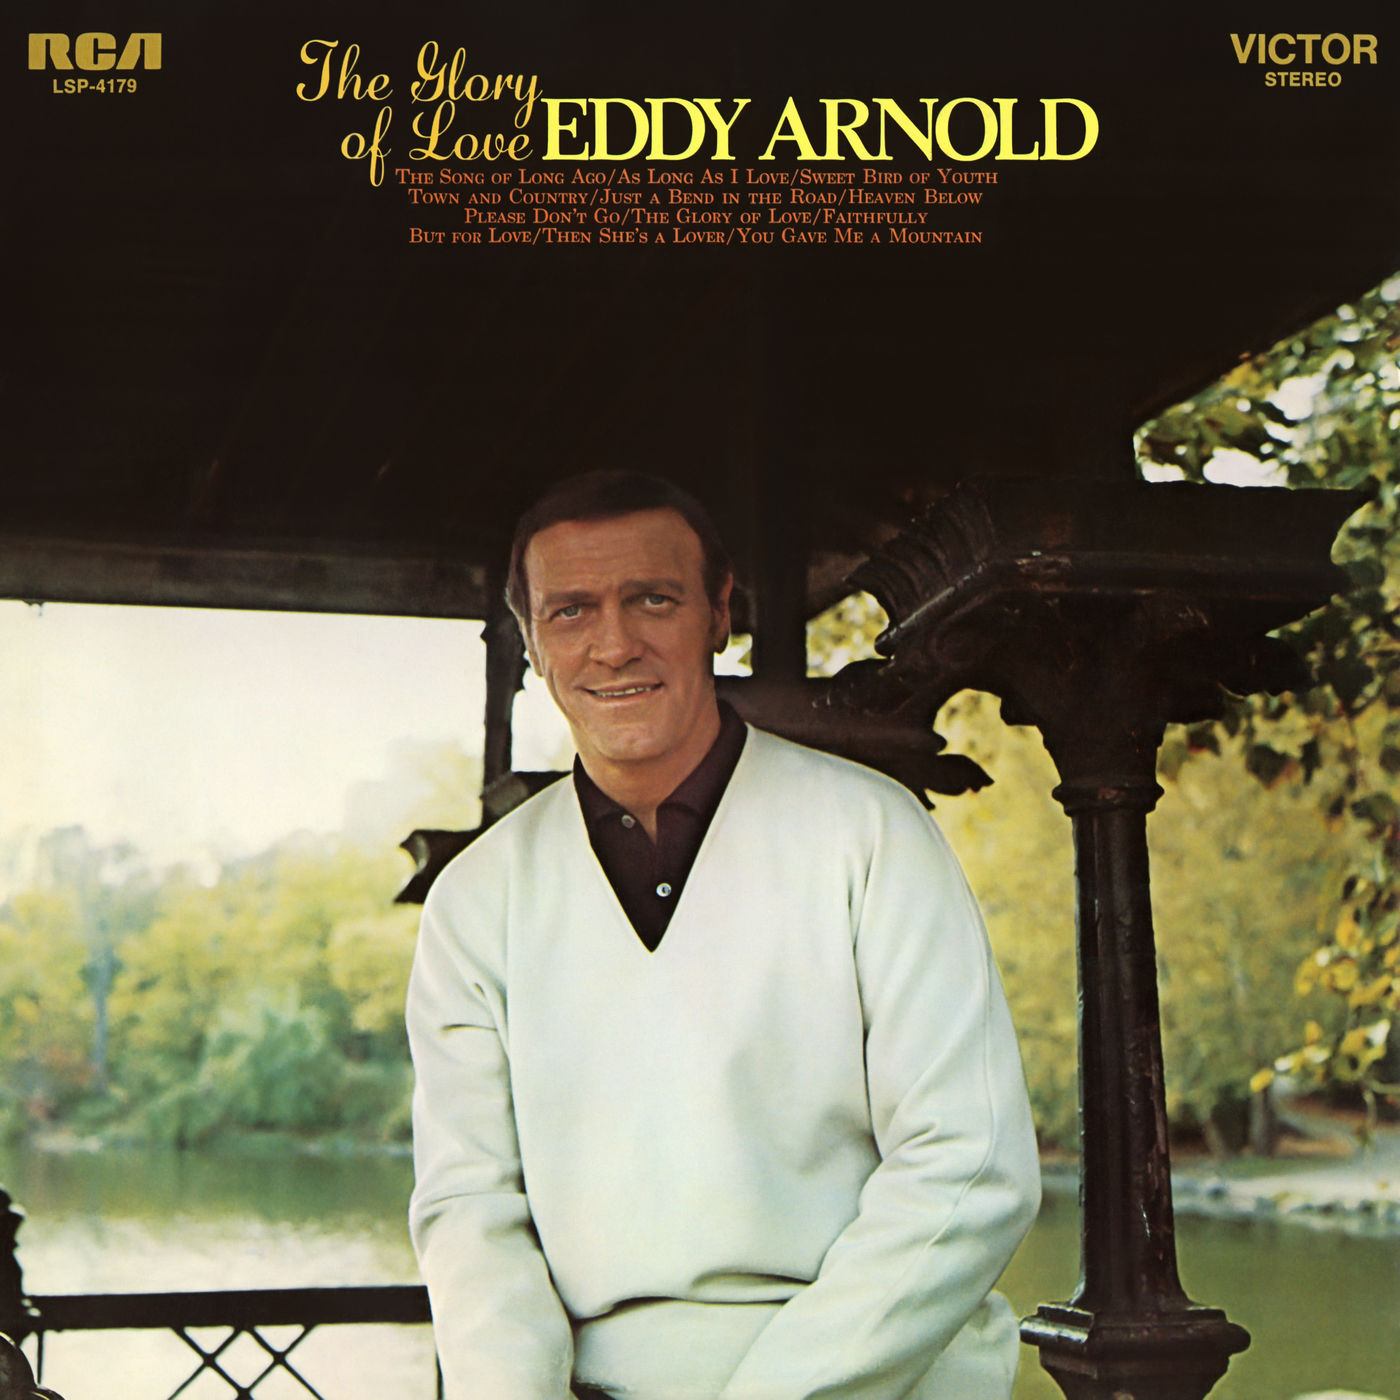 Eddy Arnold – The Glory of Love